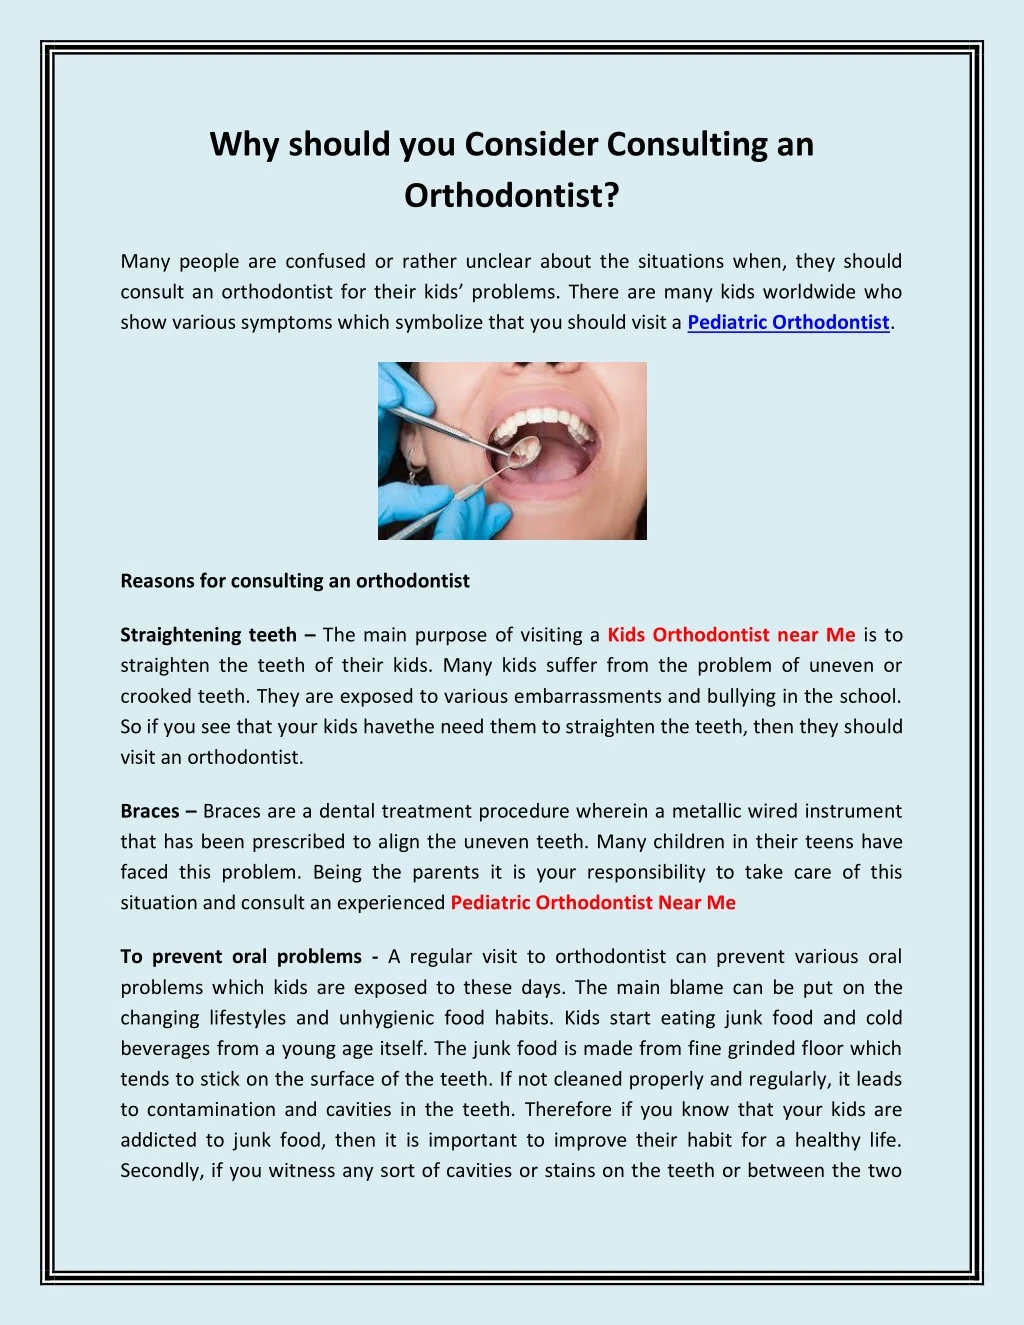 why should you consider consulting an orthodontist